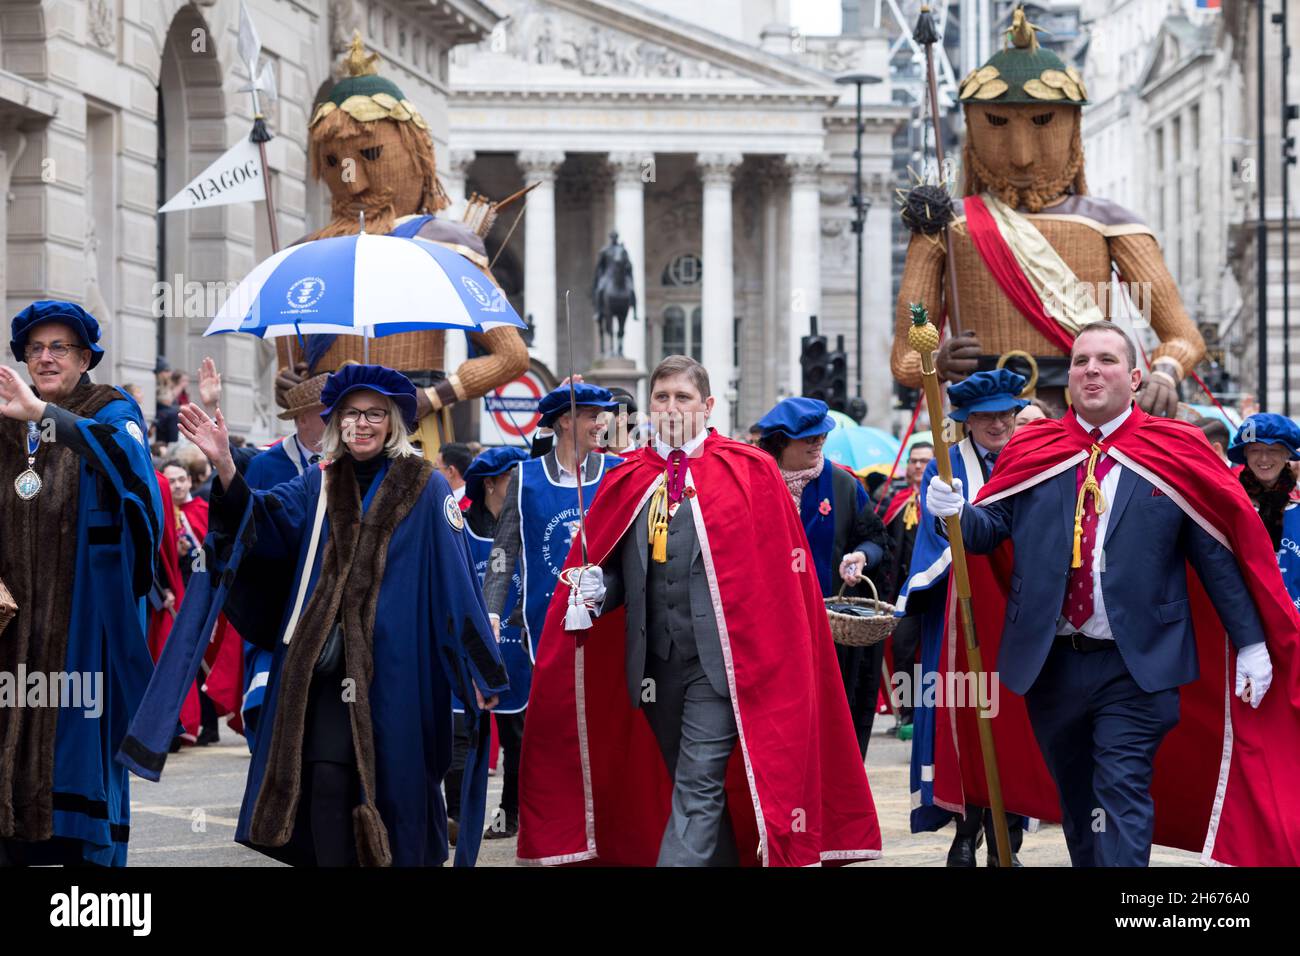 London, UK. 13th Nov, 2021. Members from the Worshipful Company of Basketmakers seen marching along the Bank of England, with giants Gog and Magog, during the parade.The Lord Mayor's Show dates back to the early 13th century, when King John rashly allowed the City of London to appoint its own Mayor. Every year, the newly-elected Mayor tours the city in a golden carriage to swear loyalty to the Crown. This year, Alderman Vincent Keaveny was elected as the 693rd Lord Mayor of the City of London. The parade begins at Mansion House. Credit: SOPA Images Limited/Alamy Live News Stock Photo